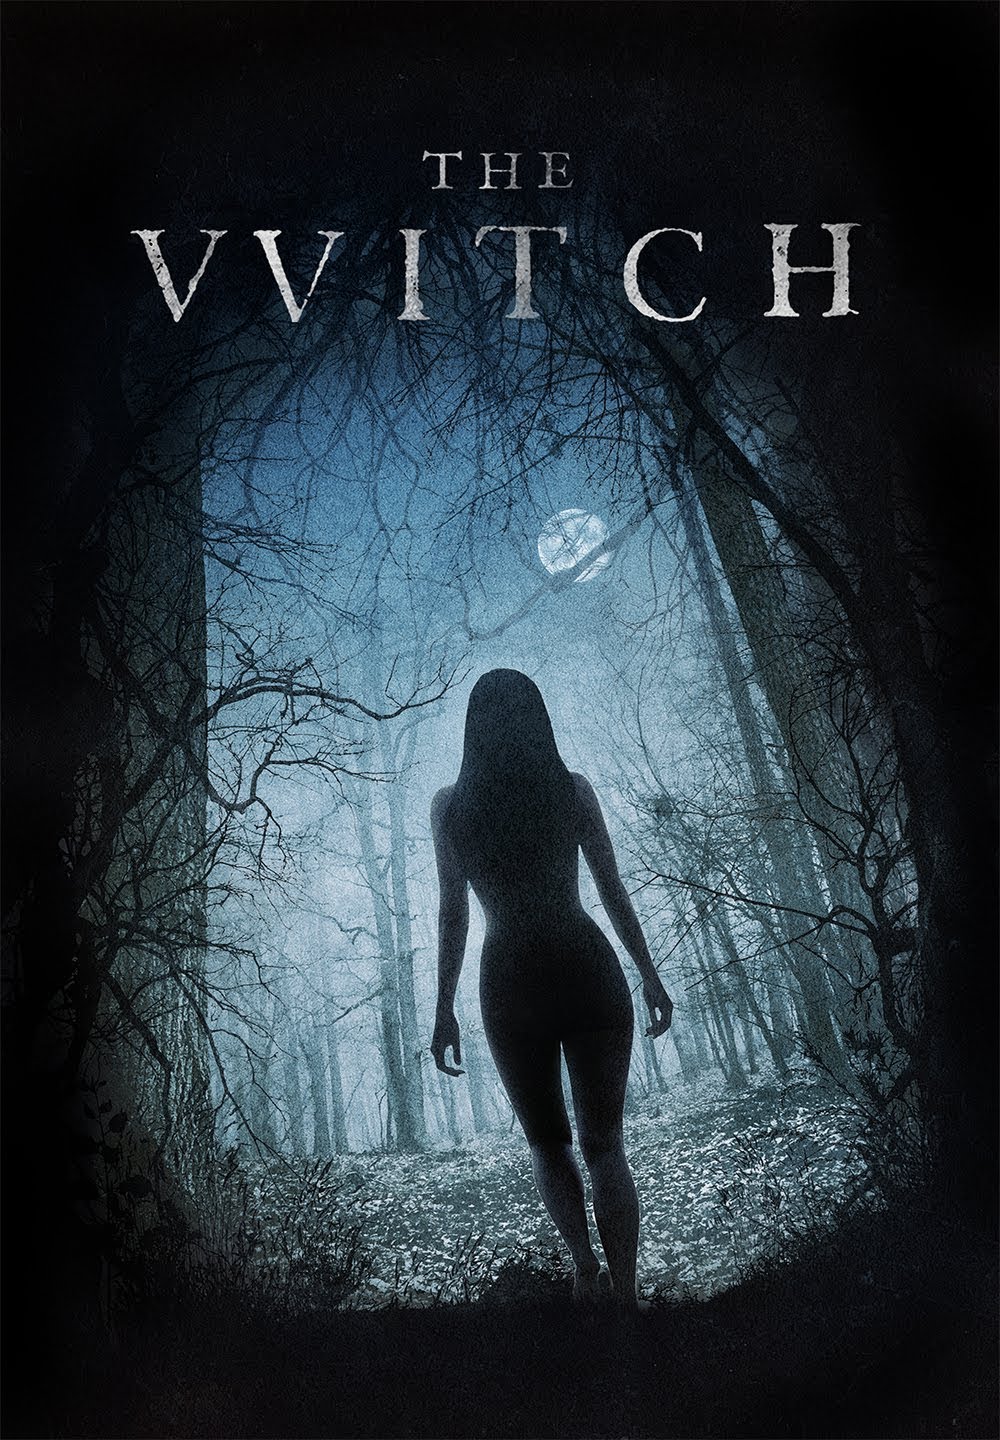 The Witch [HD] (2016)